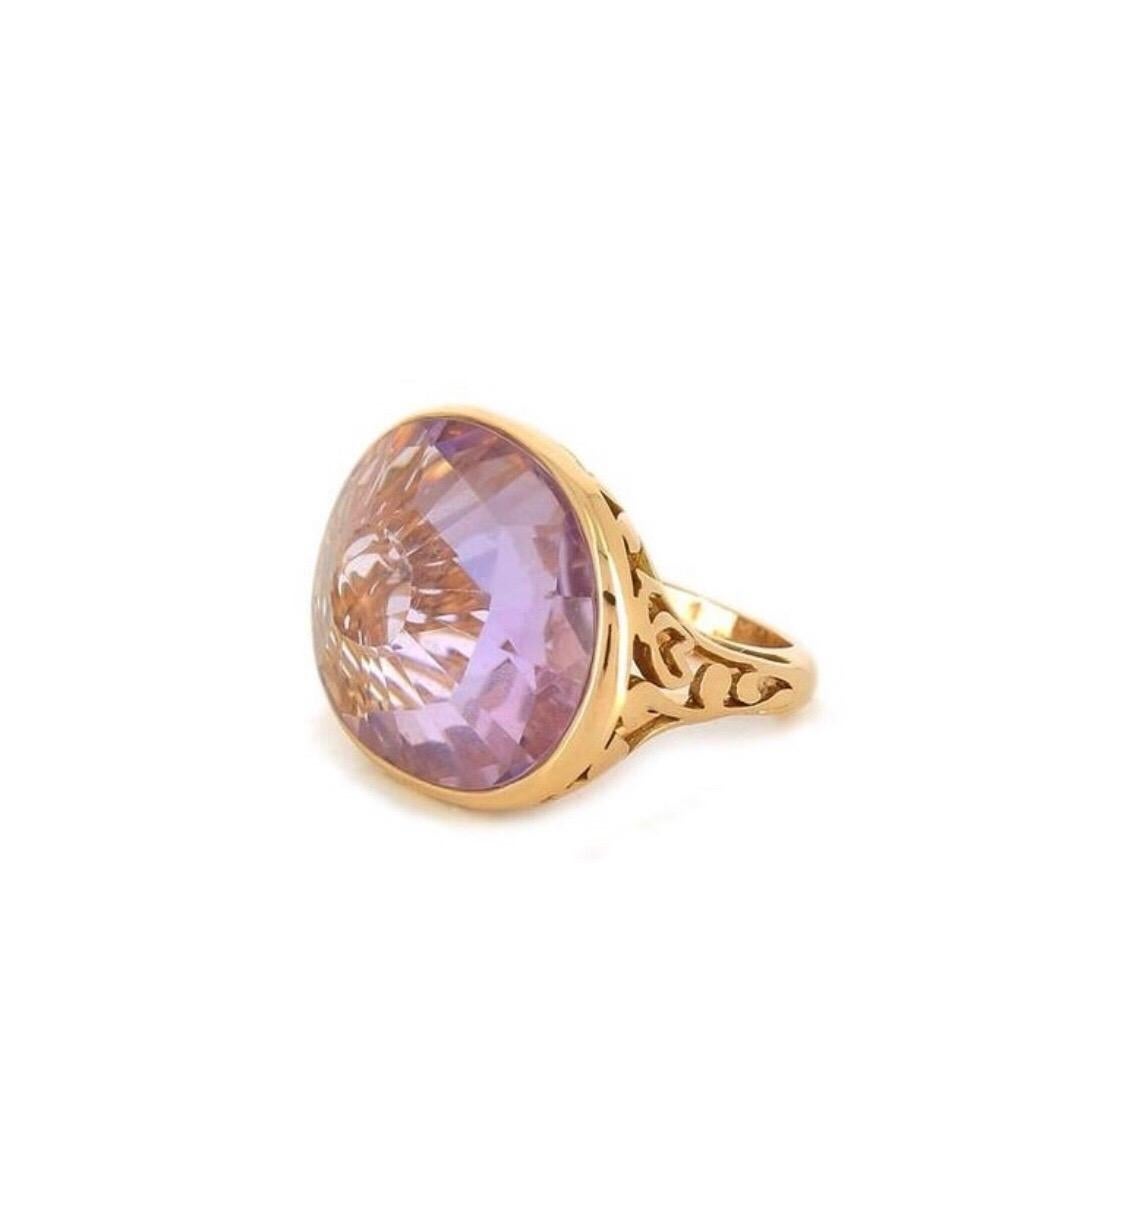 Contemporary Pomellato Arabesque 18kt Rose Gold and Amethyst Cocktail Ring size 51